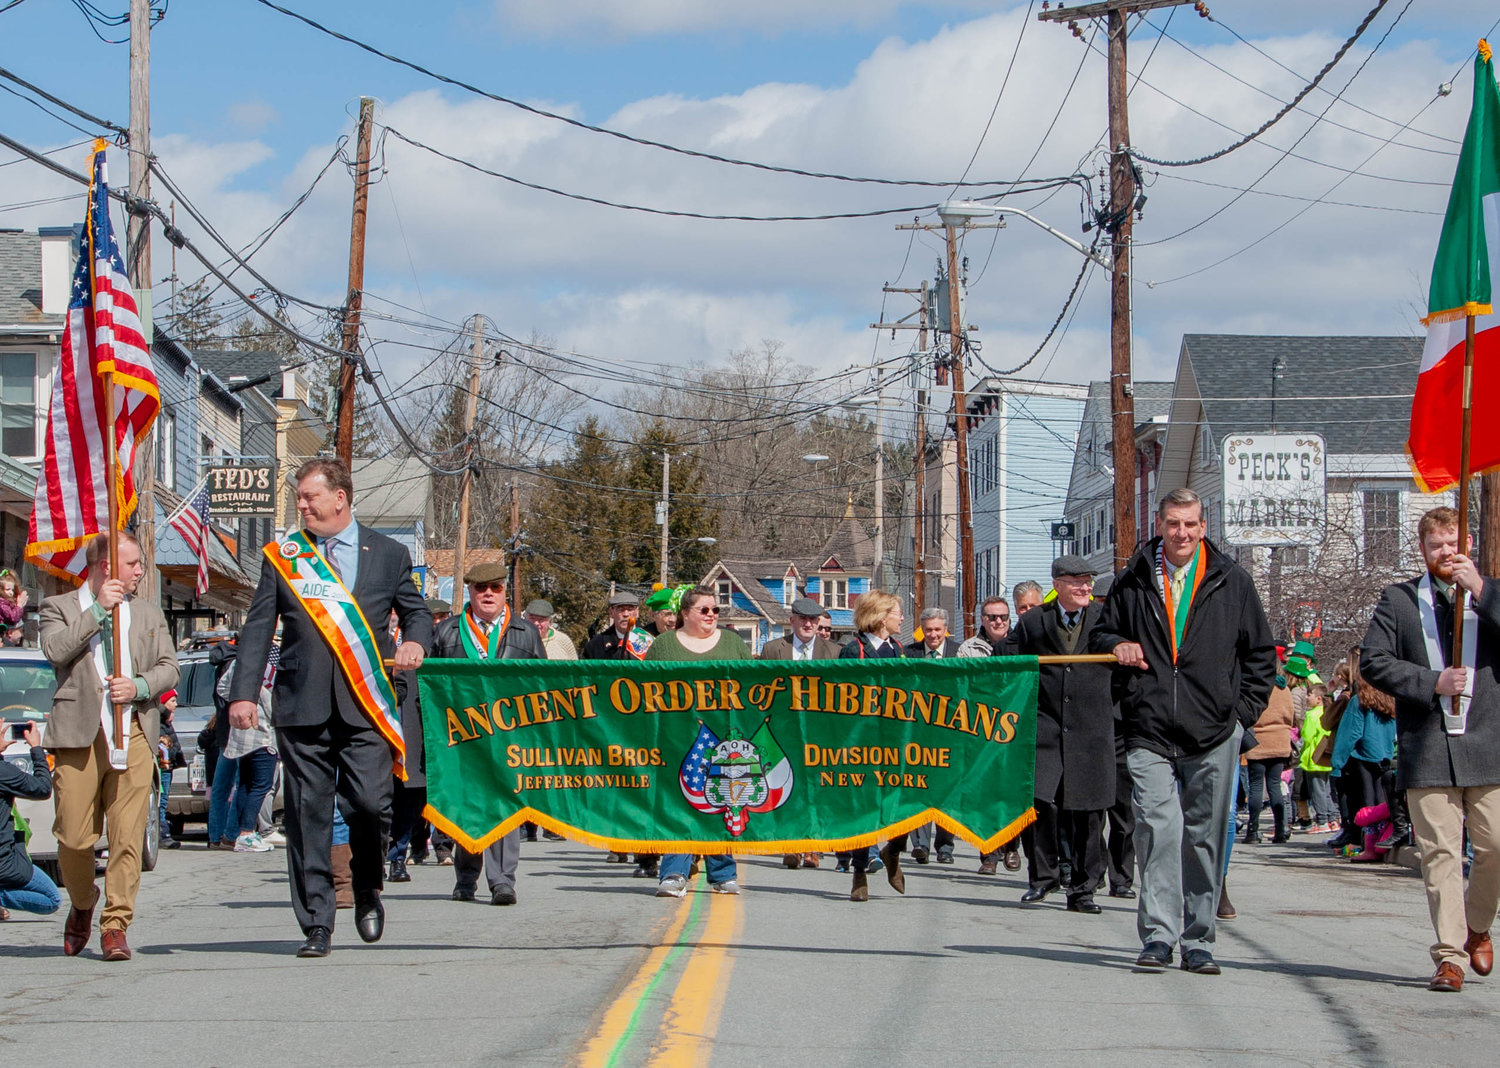 The Jeffersonville St. Patrick's Day Parade was hosted by the Ancient Order of Hypernians Sullivan Brothers.